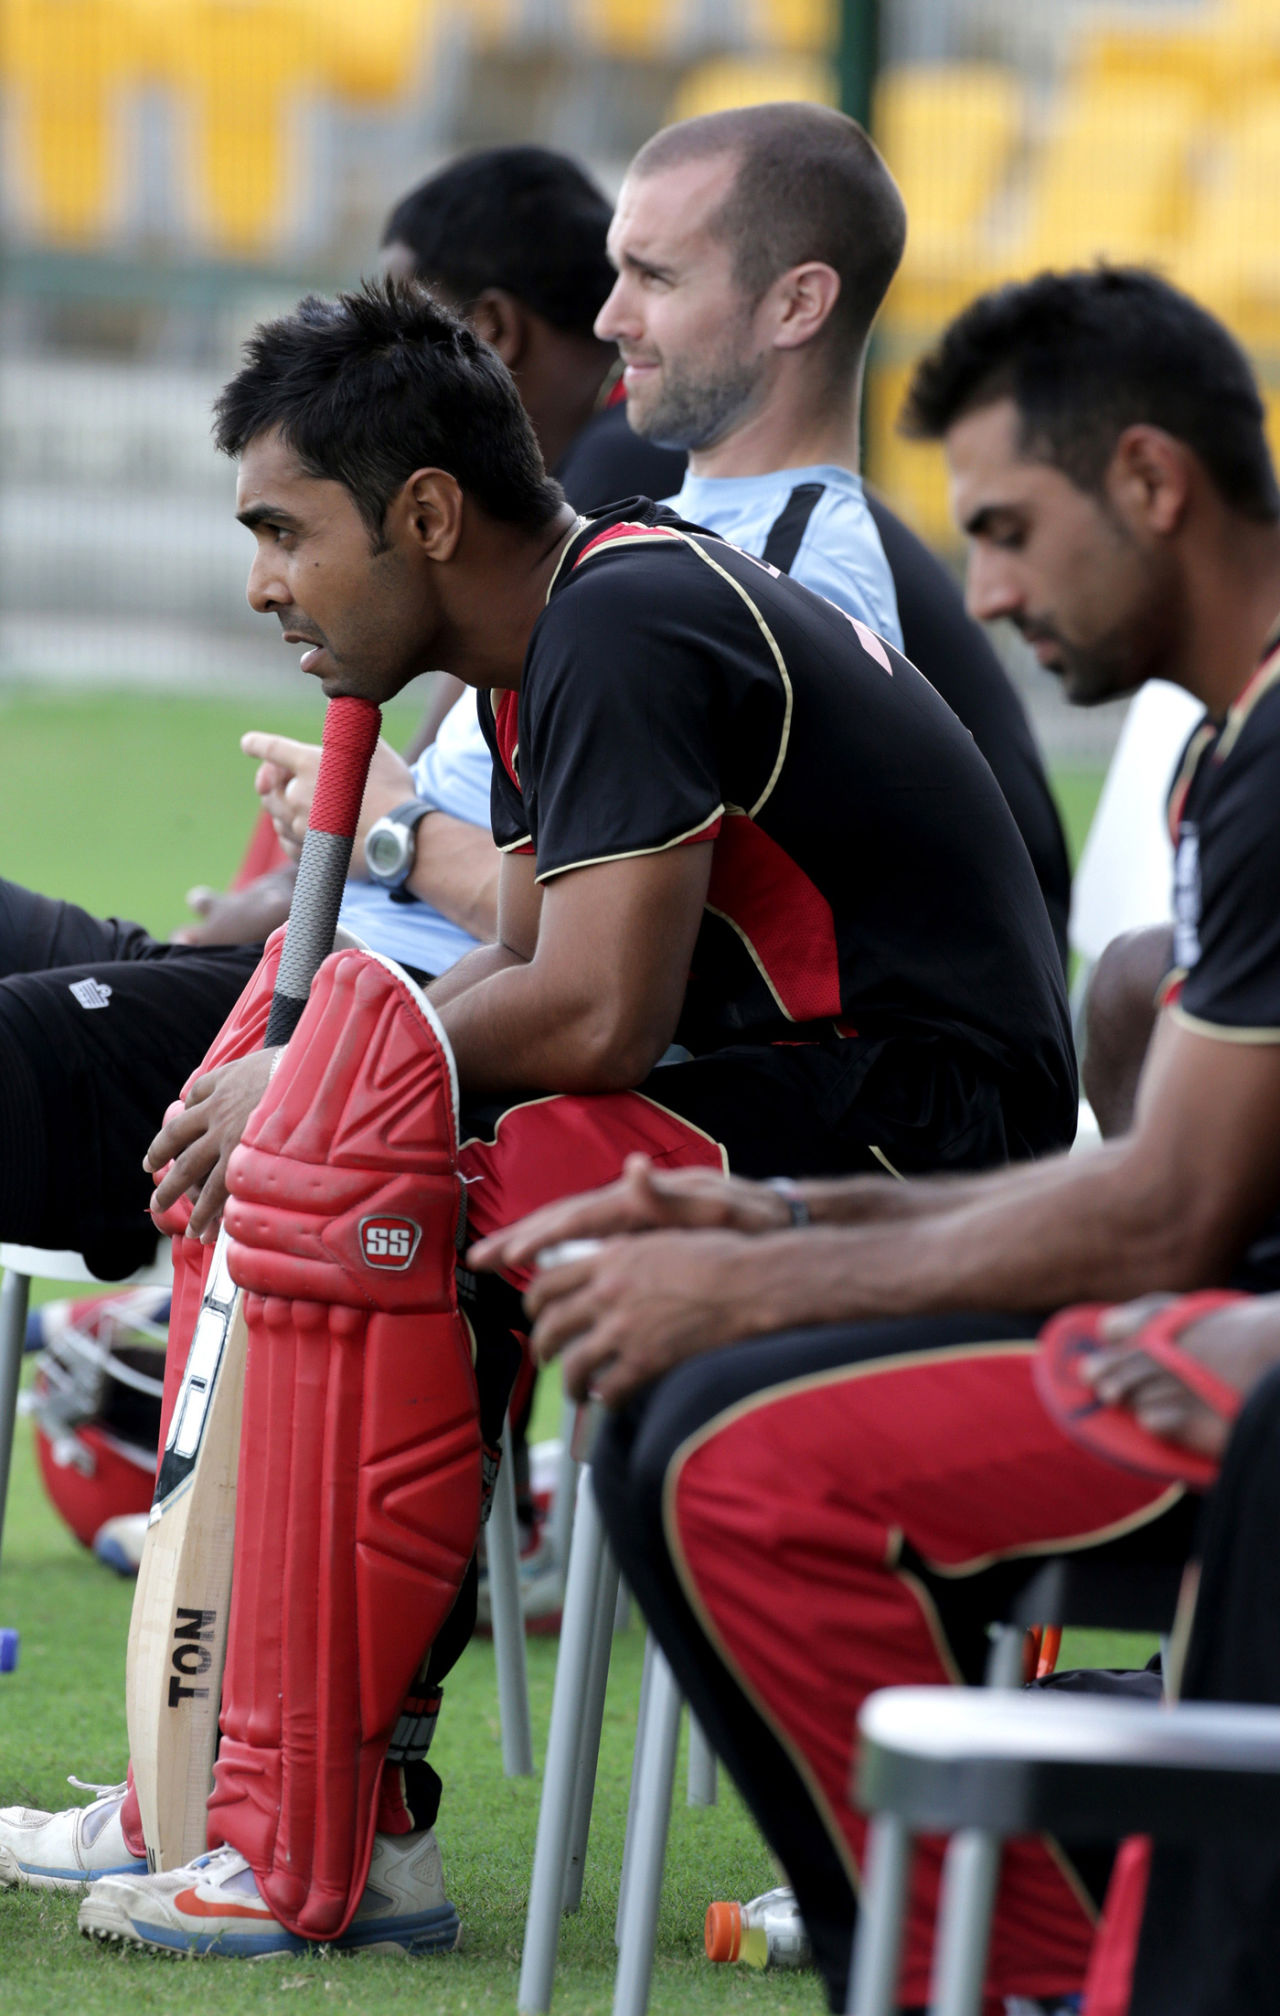 Canada's captain Ashish Bagai watches the match from the bench, Canada v Italy, ICC World Twenty20 Qualifier, Group A, Abu Dhabi, November 24, 2013